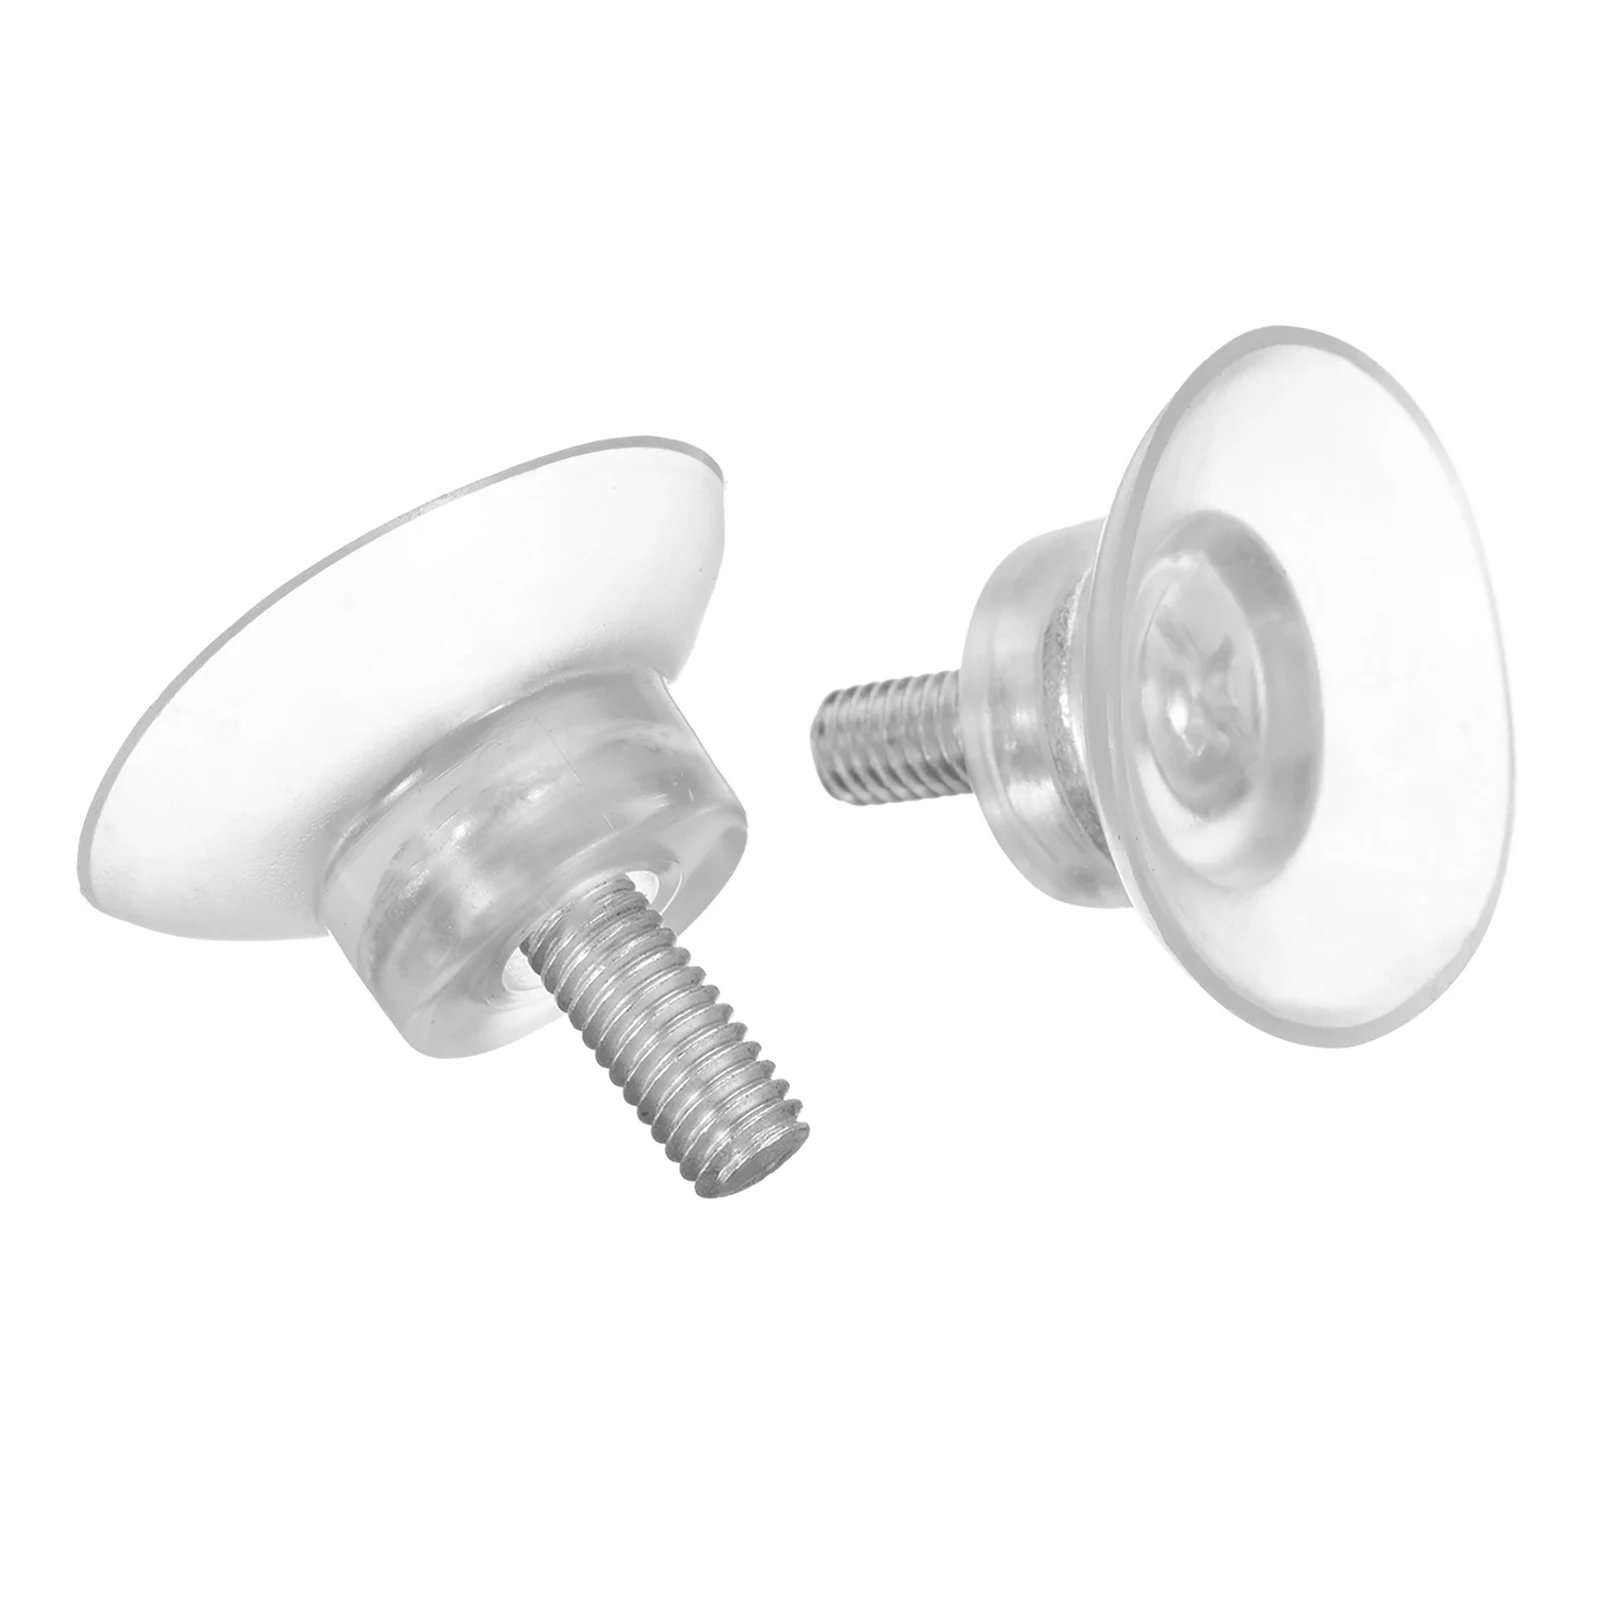 

10pcs Strong Suction Cup With M8 Screw Replacements For Glass Table Top Rustproof Stainless Steel PVC Structure Modern